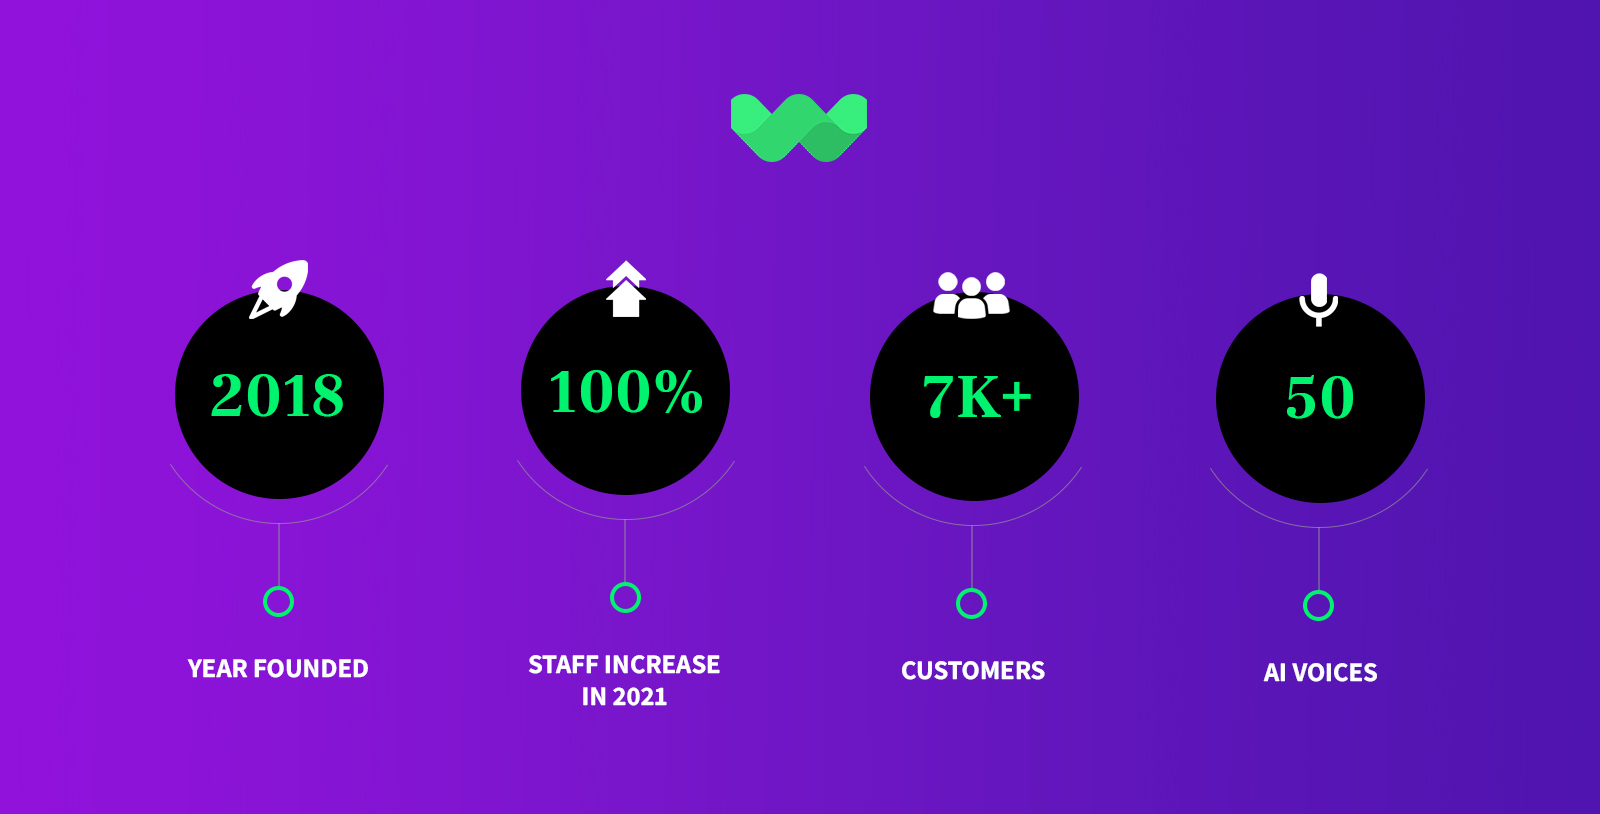 WellSaid Labs AI Voice Growth Graphic